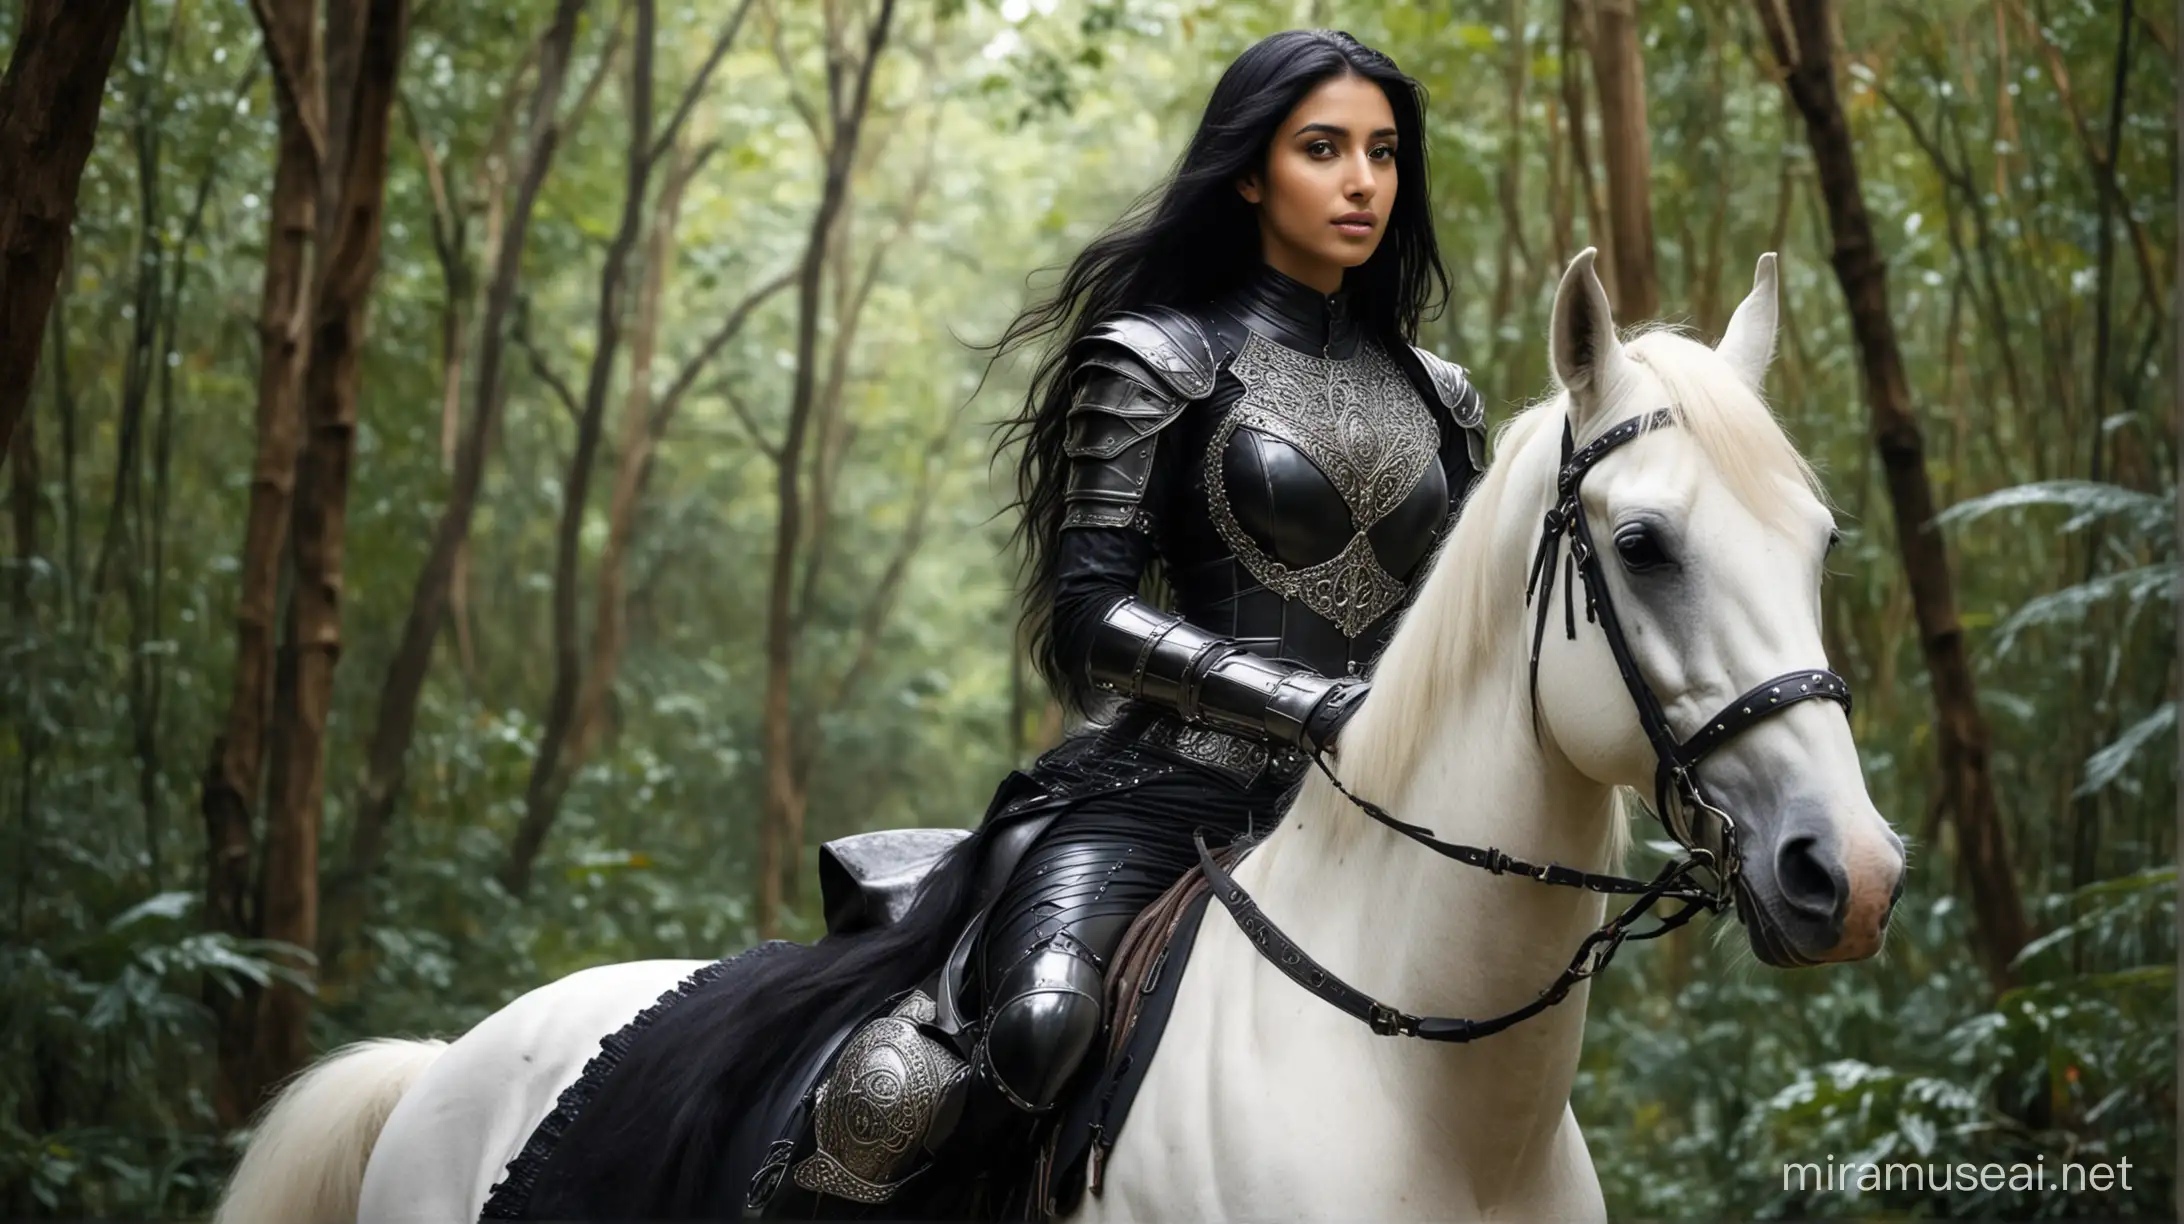 beautiful Arab woman dressed in black knight armor, in an Indian rainforest, she is about 21 years old, long black hair, beautiful nose, attractive cheek bones, arched eyebrows, she is riding a white horse